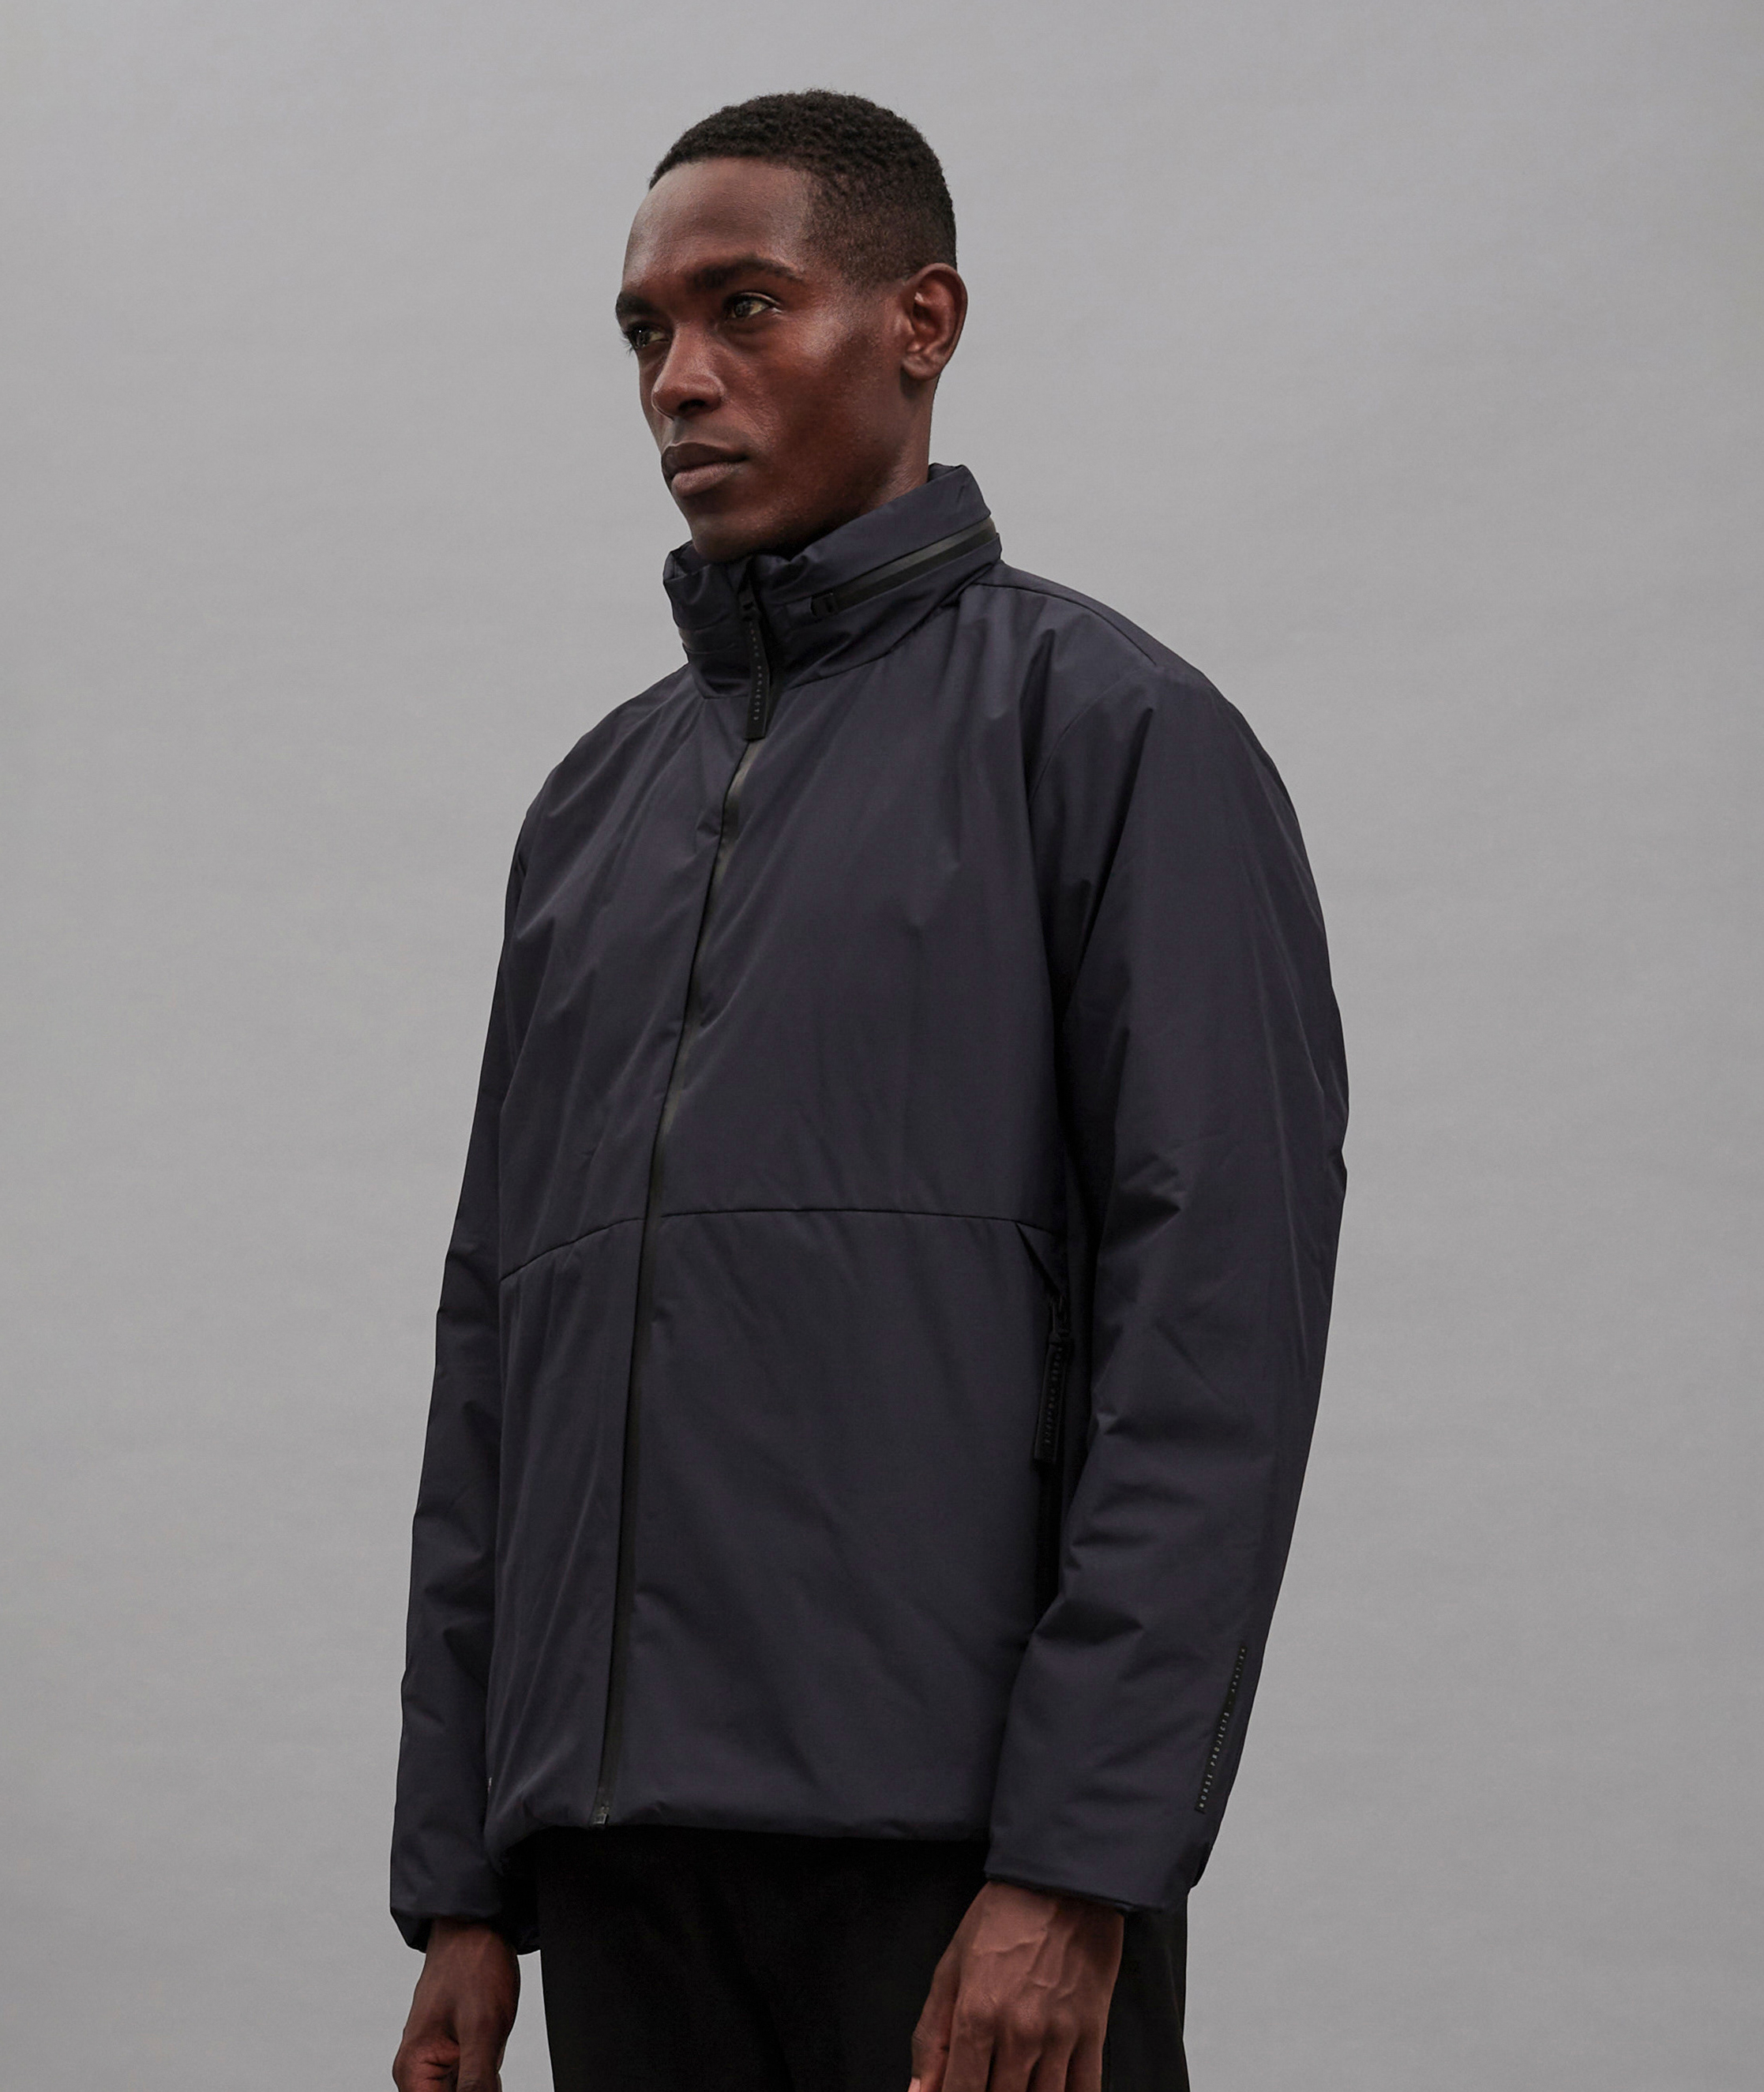 Norse Store | Shipping Worldwide - Norse Projects Pertex Shield ...